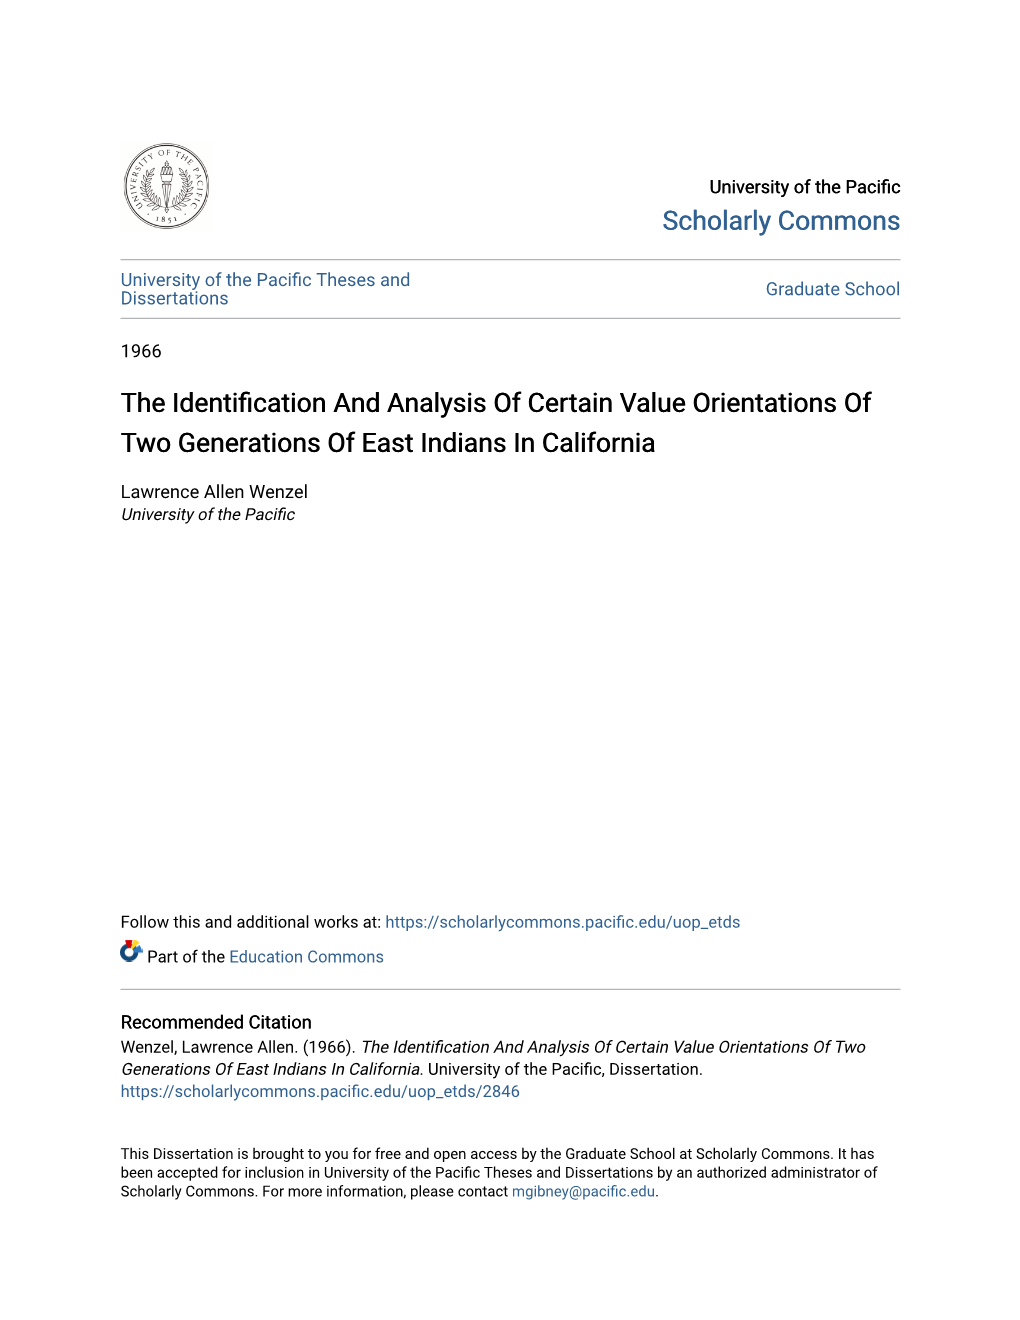 The Identification and Analysis of Certain Value Orientations of Two Generations of East Indians in California